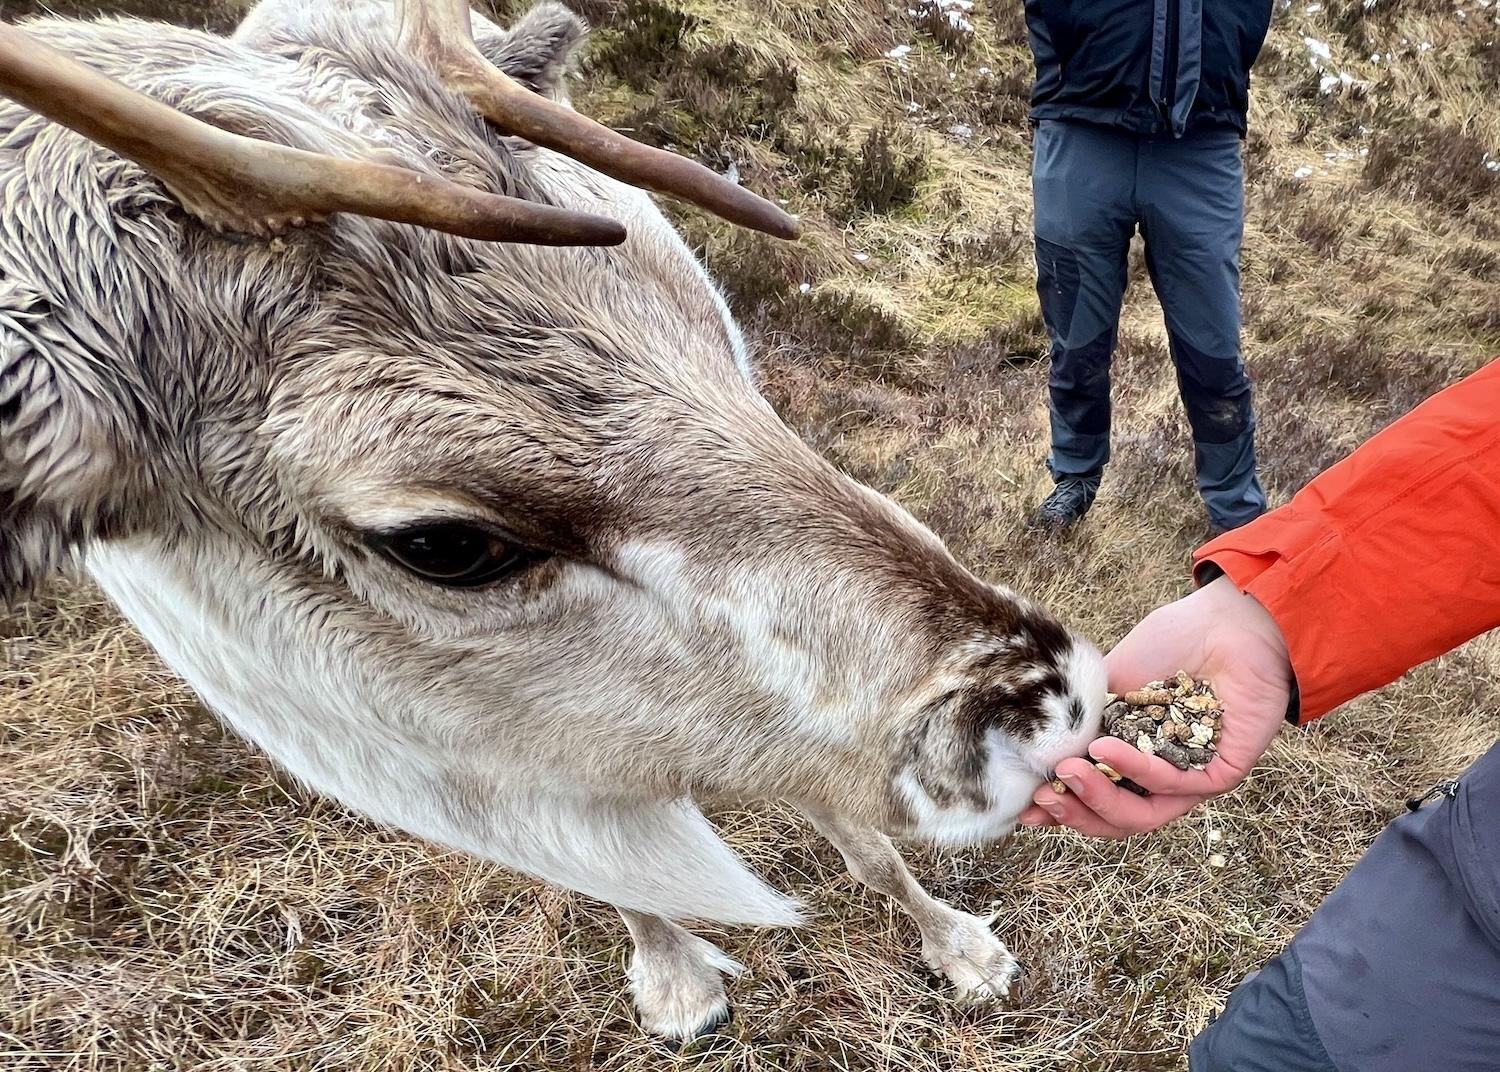 Feeding a reindeer named Ochil, who was named for a Scottish hill.